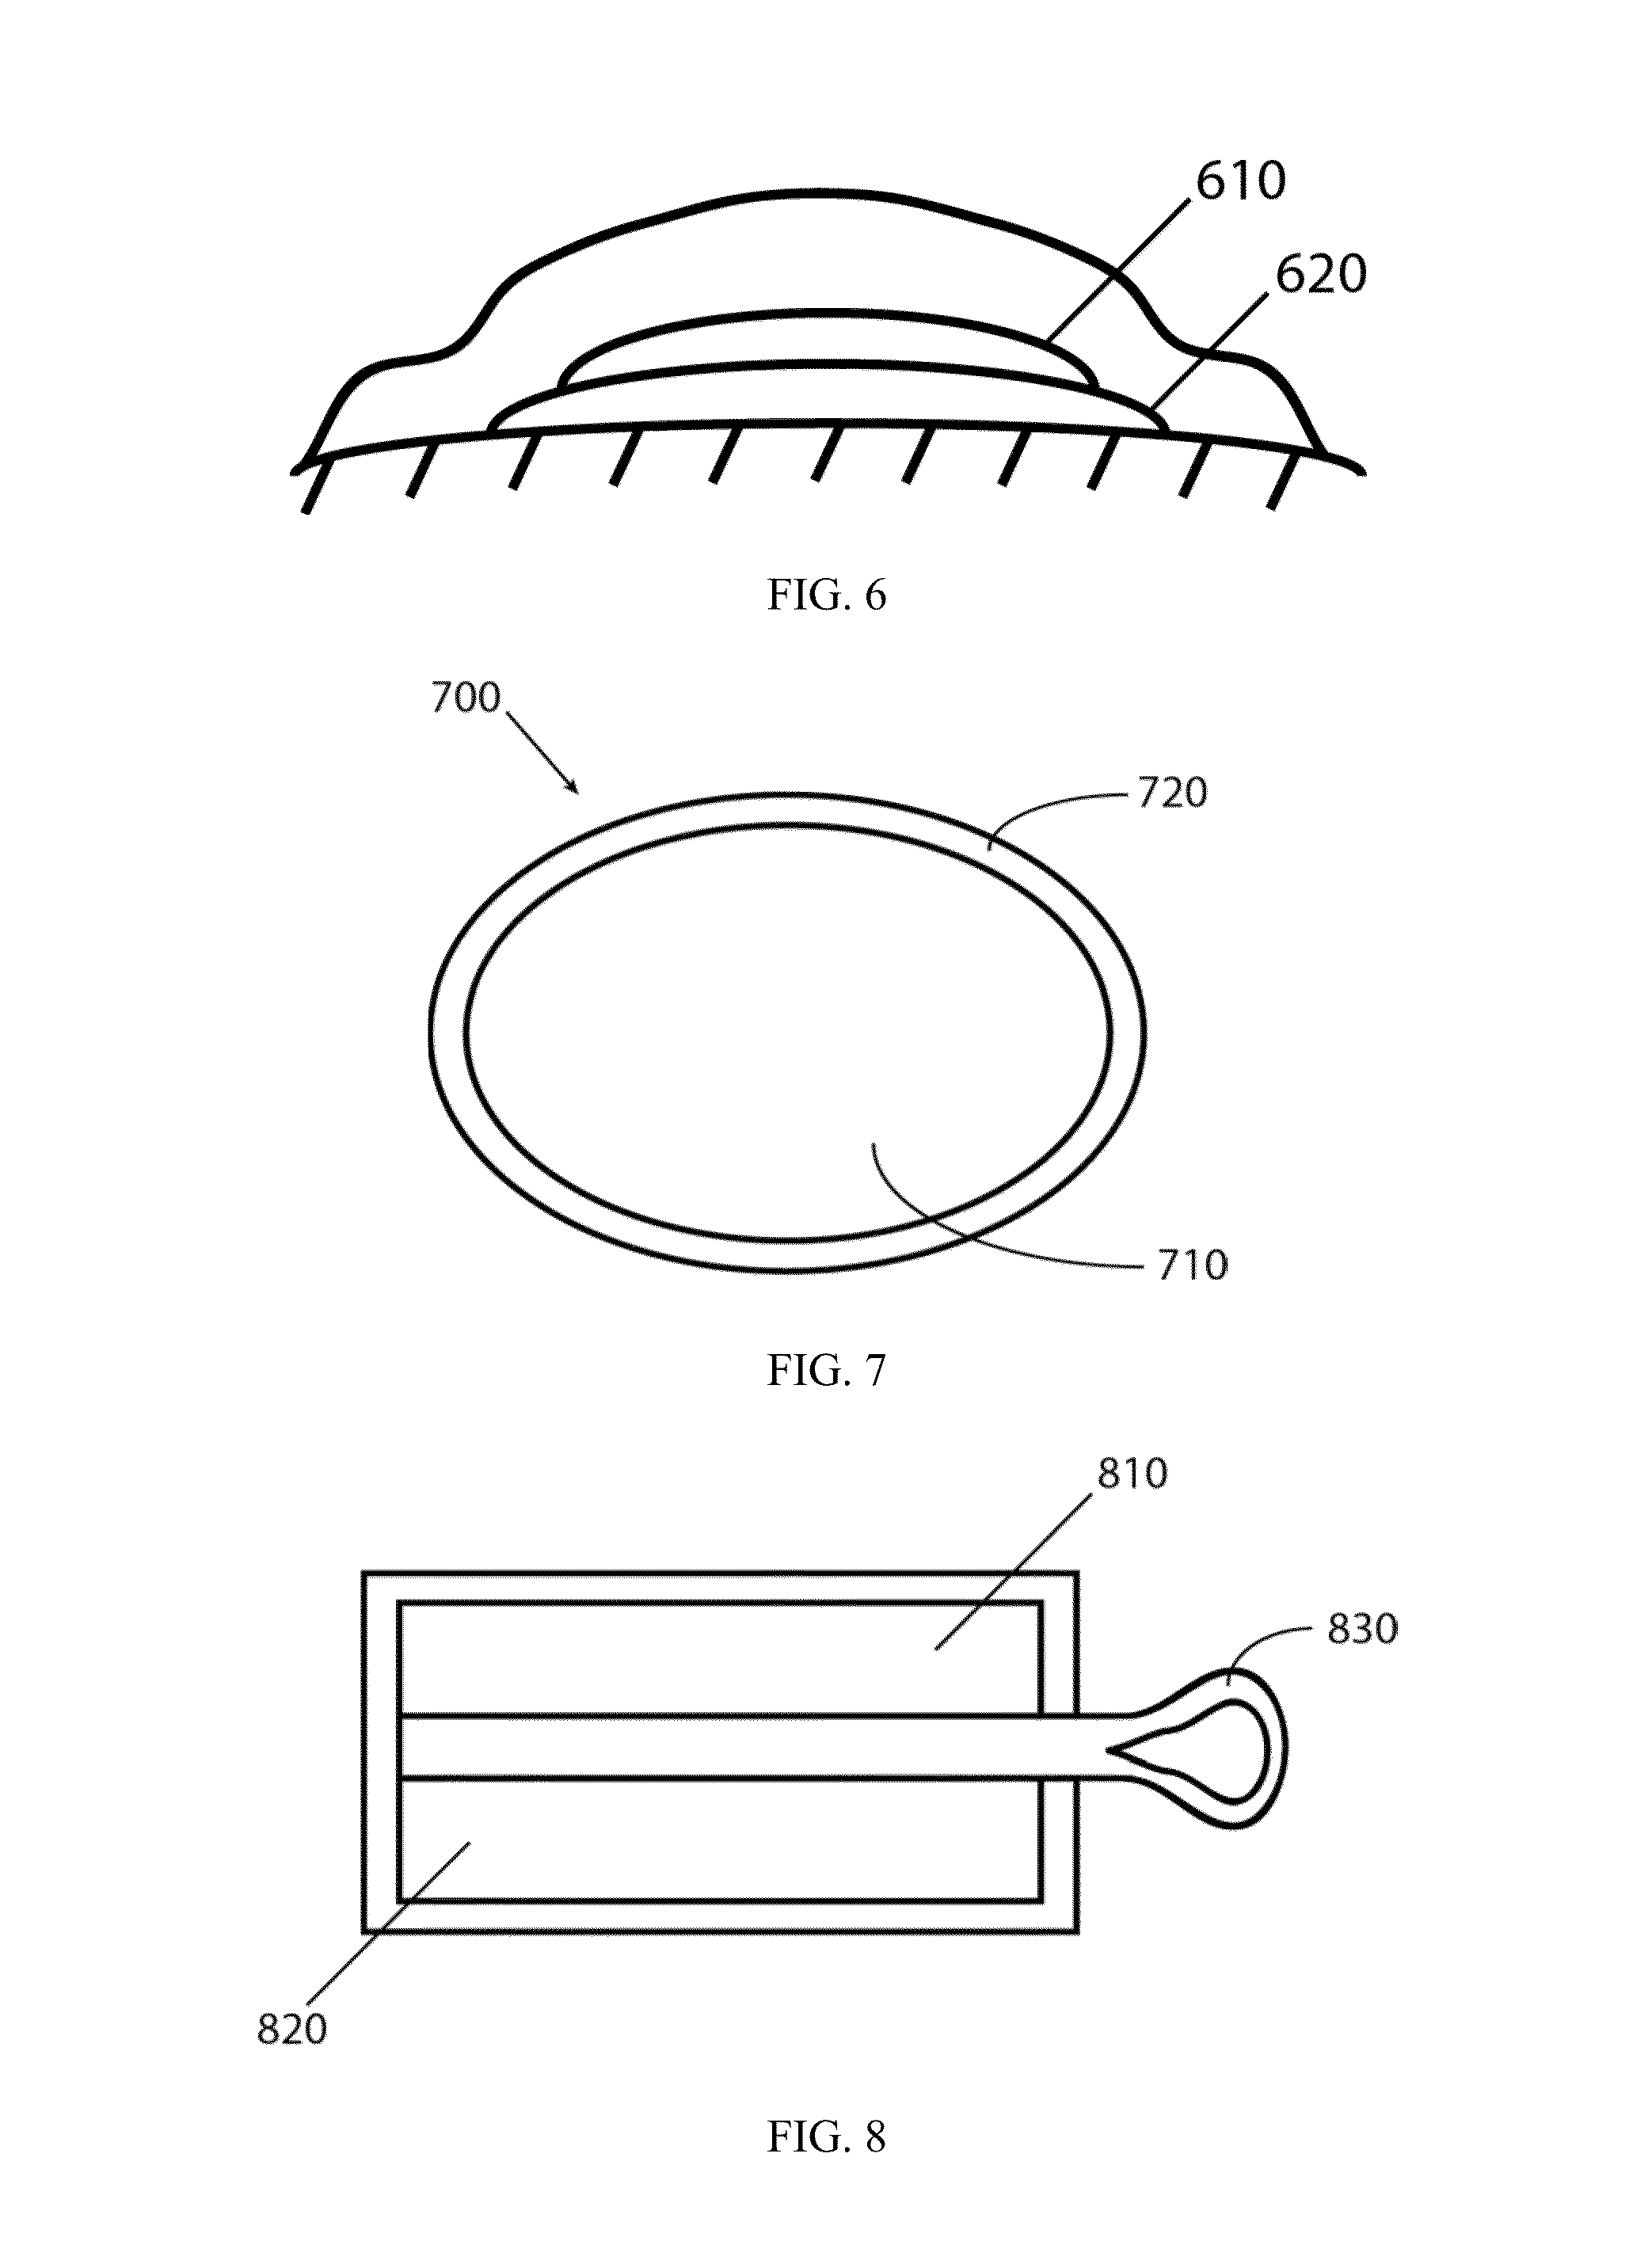 Wound care products with peracid compositions